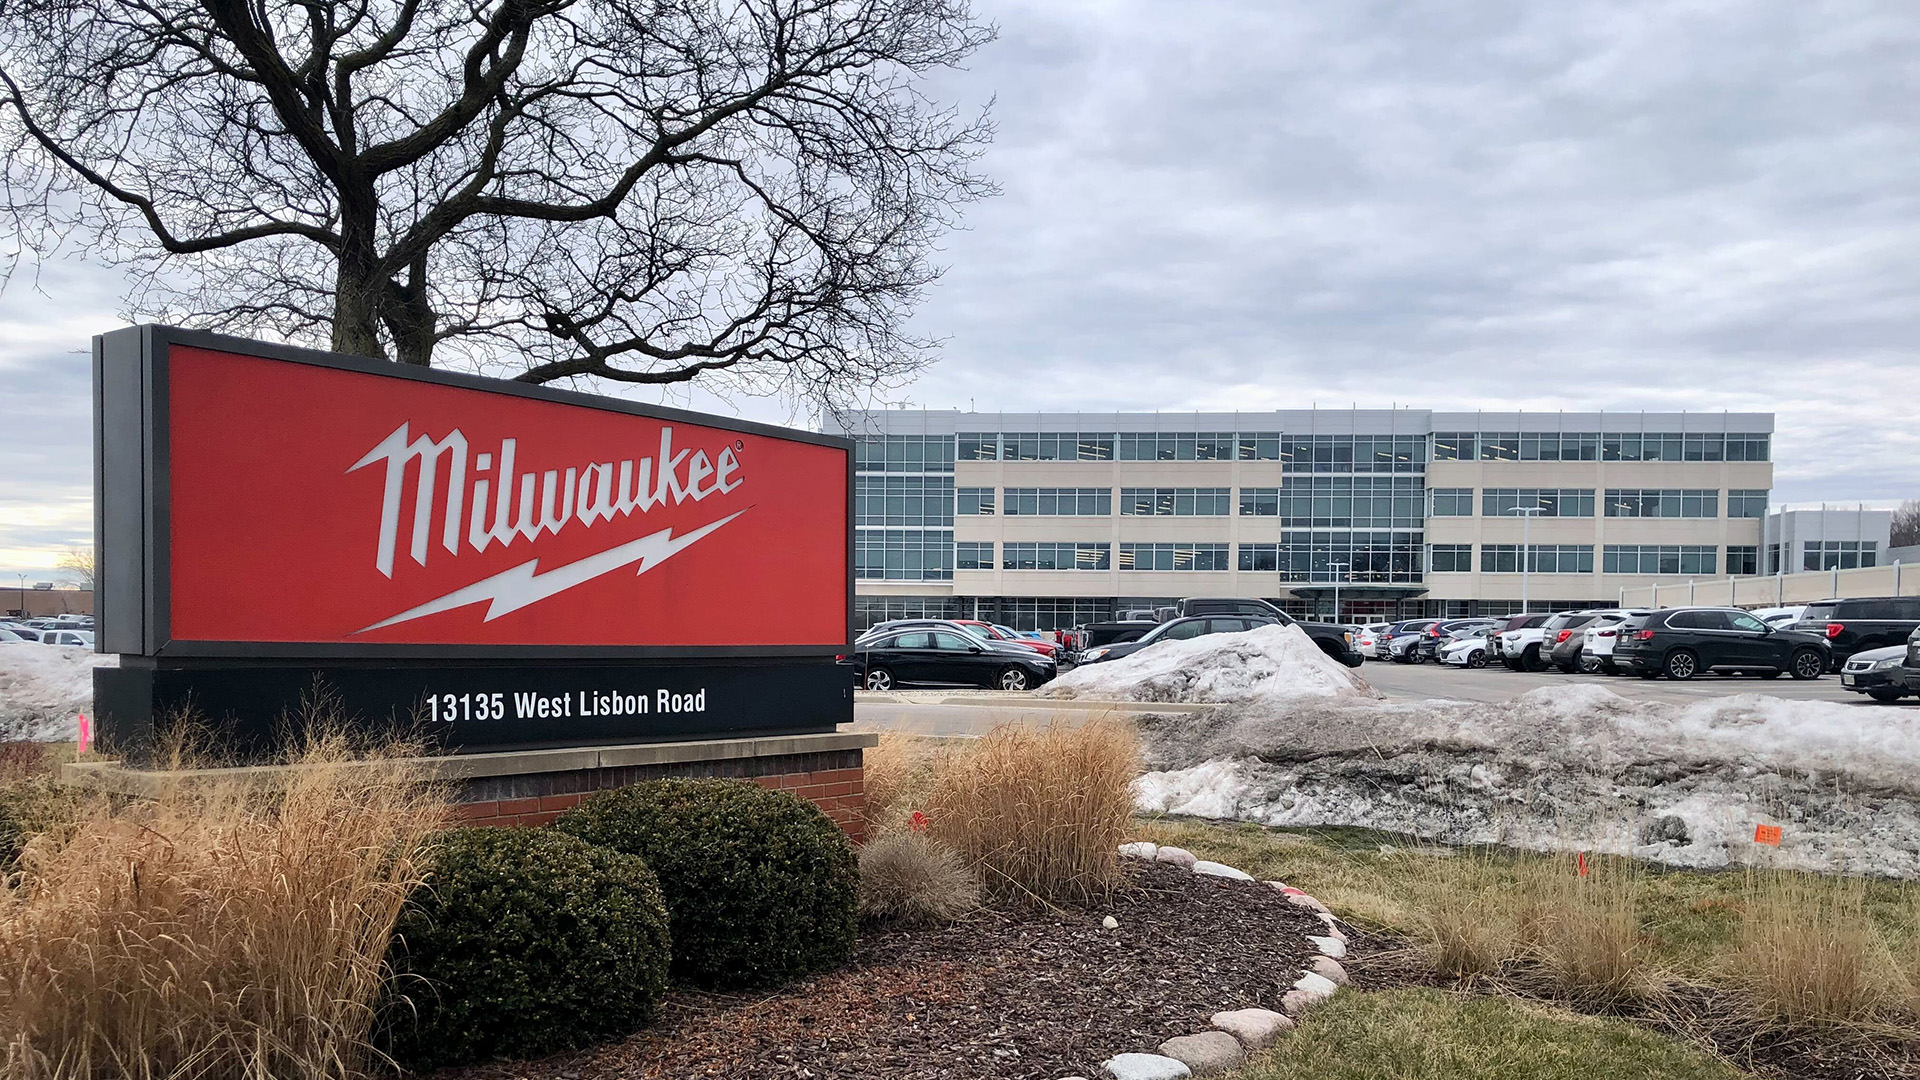 A sign with the Milwaukee Tool wordmark and lightning bolt logo is surrounded by bushes near the entrance to a parking lot, with a tree, parked cares and a multi-story office building in the background.